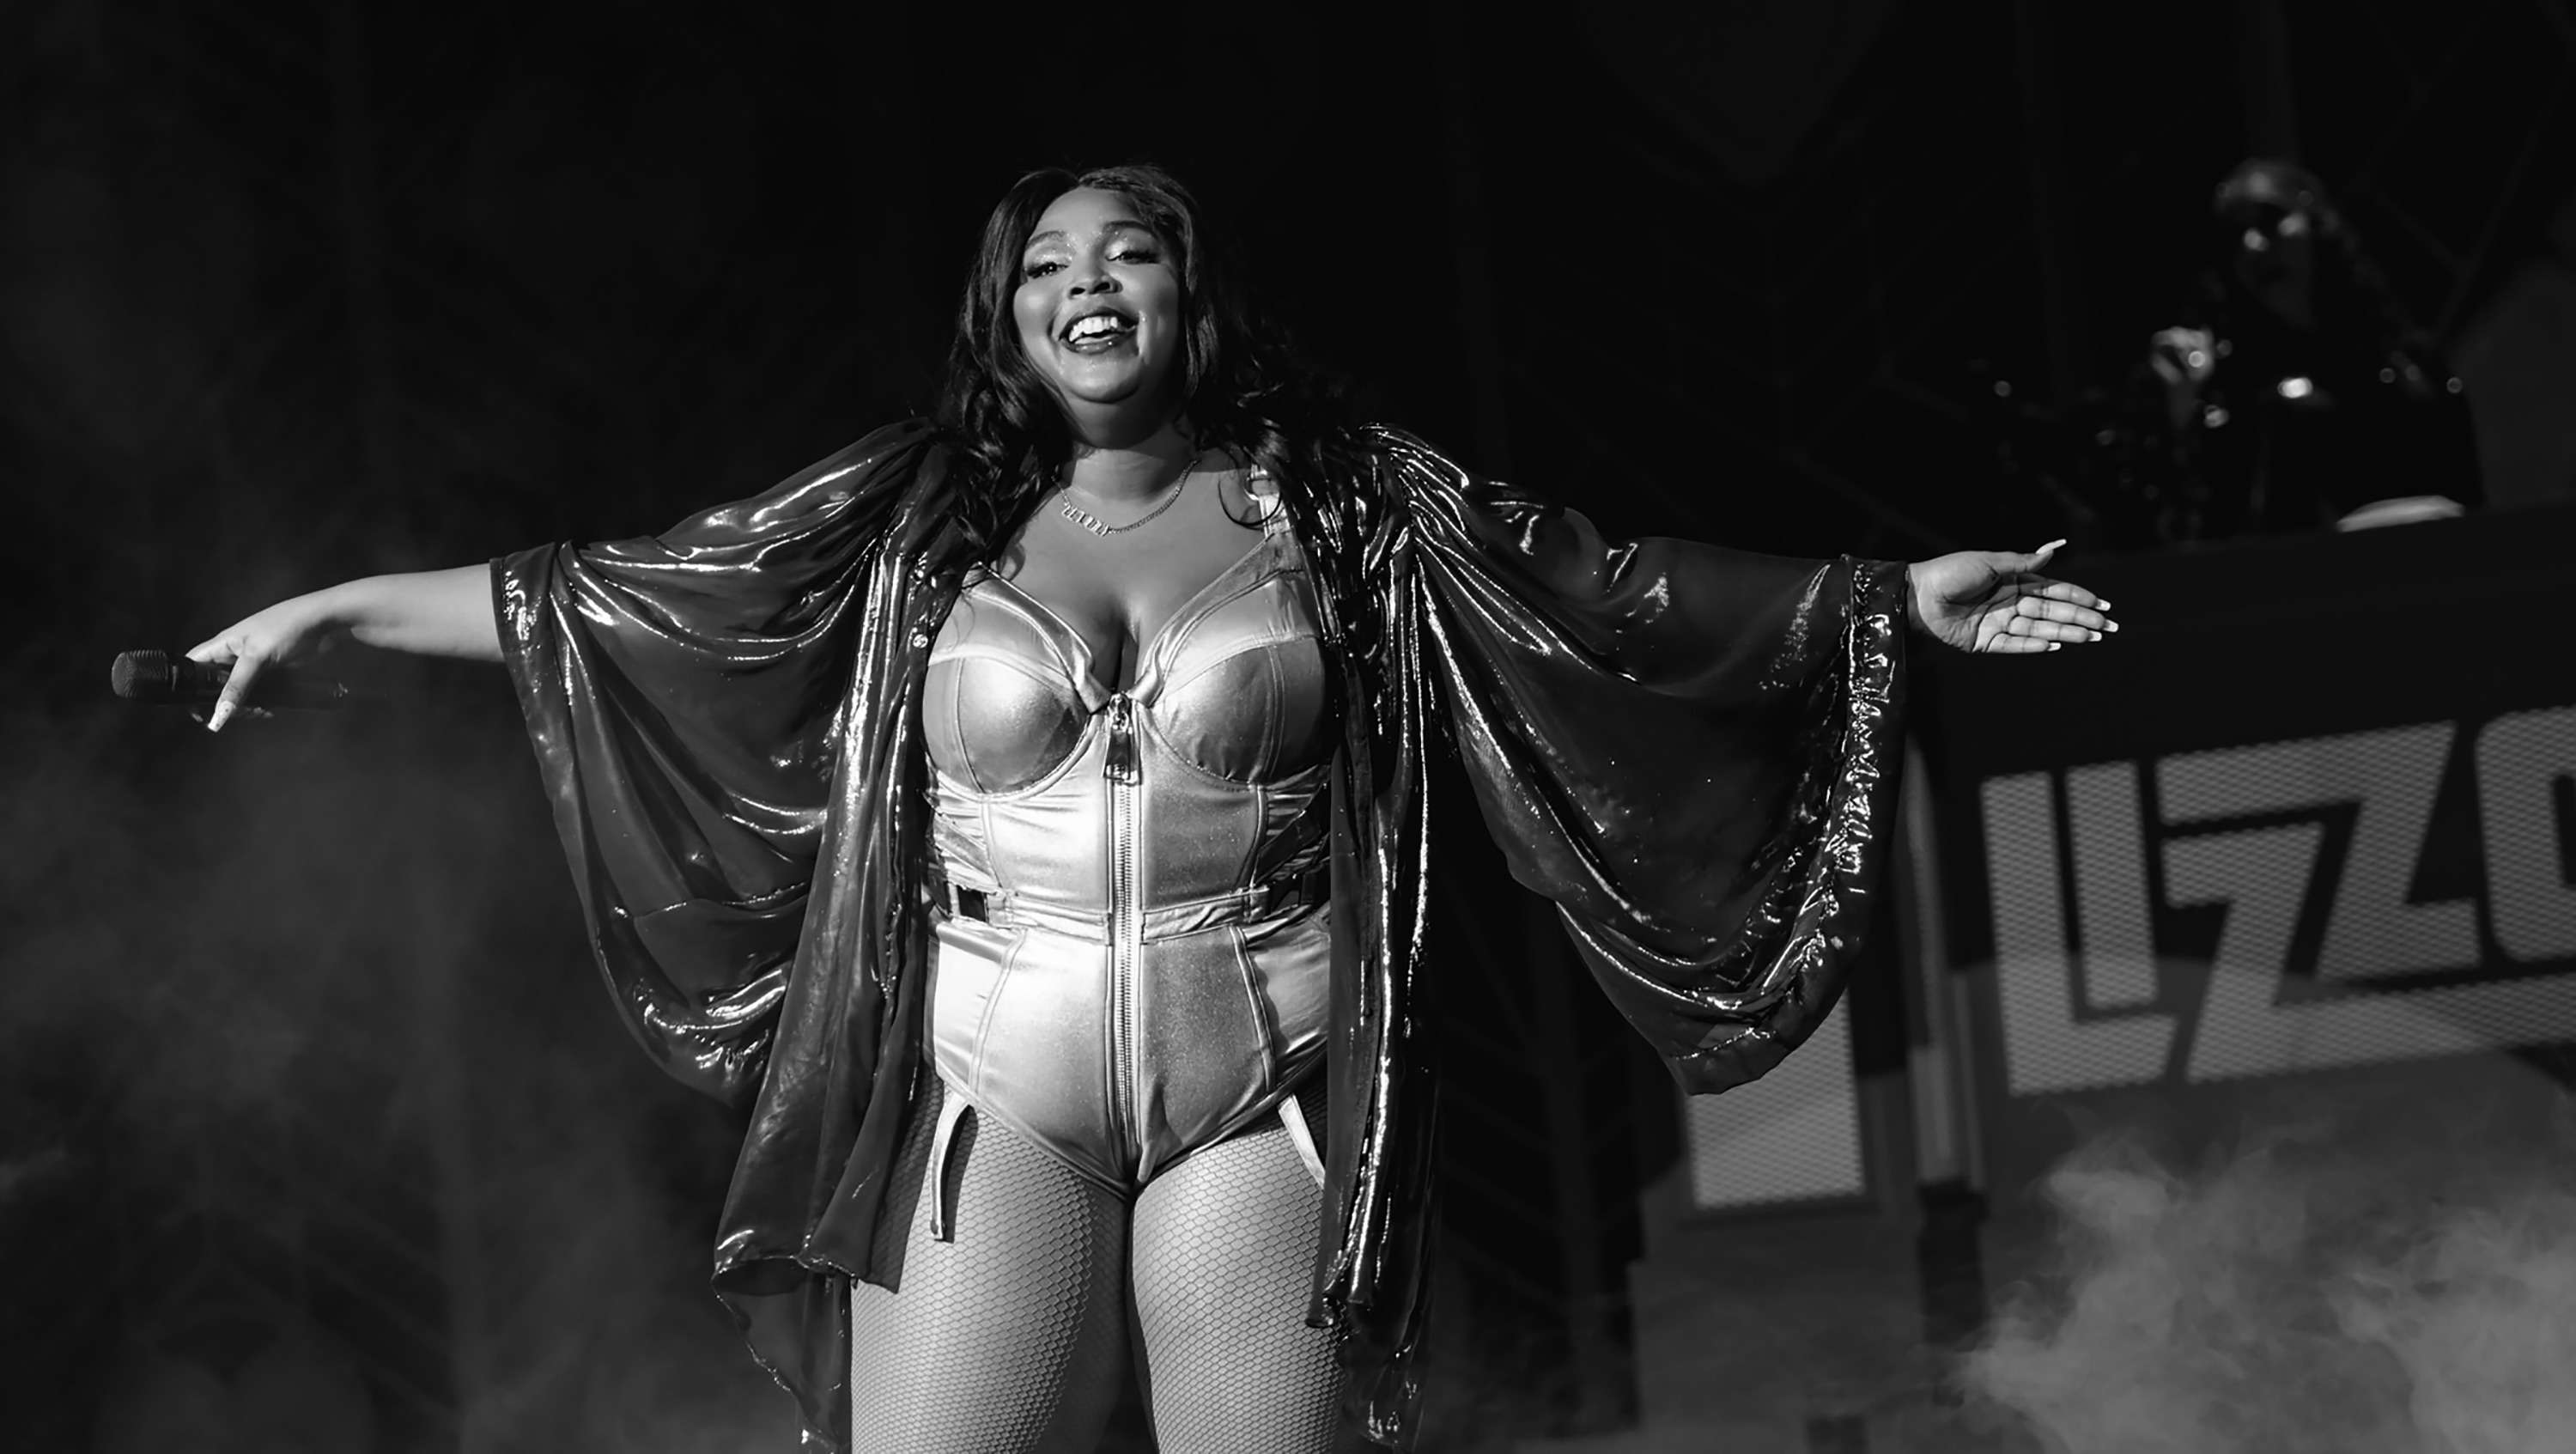 Lizzo at Brixton Academy in London 2019 credit Raph PH via Flickr